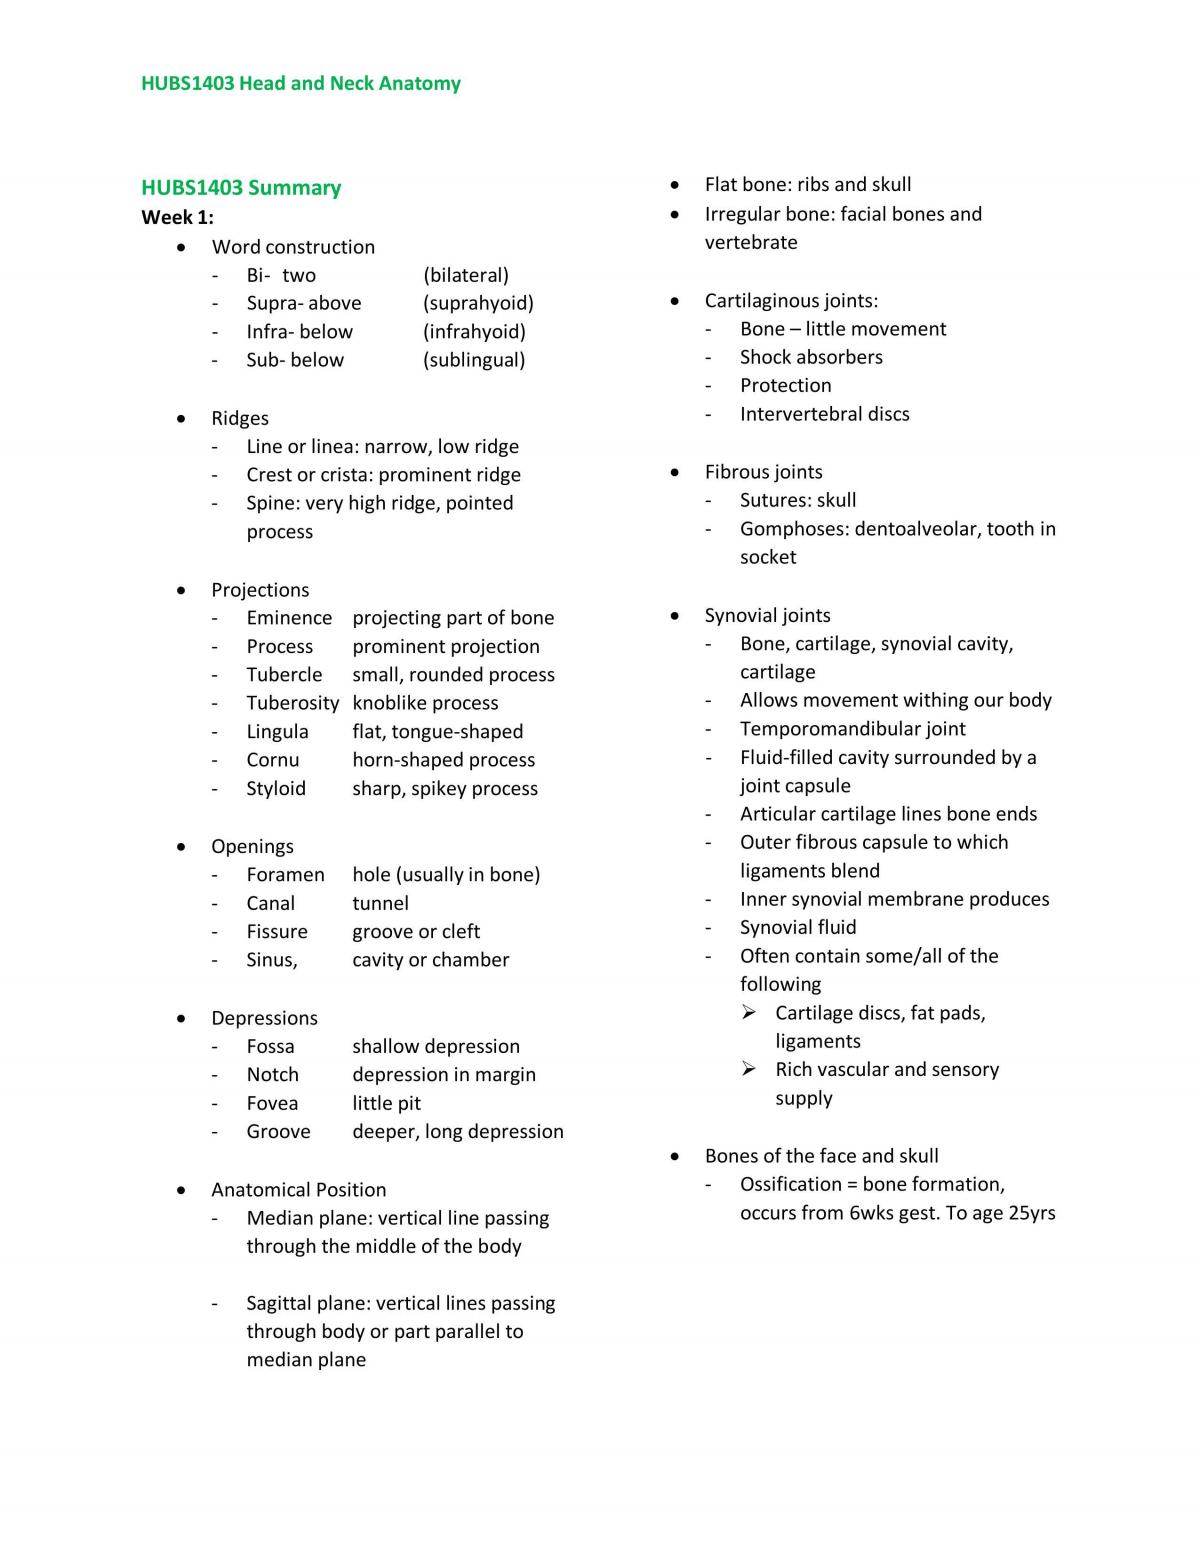 HUBS1107 - Summary Notes - Page 1